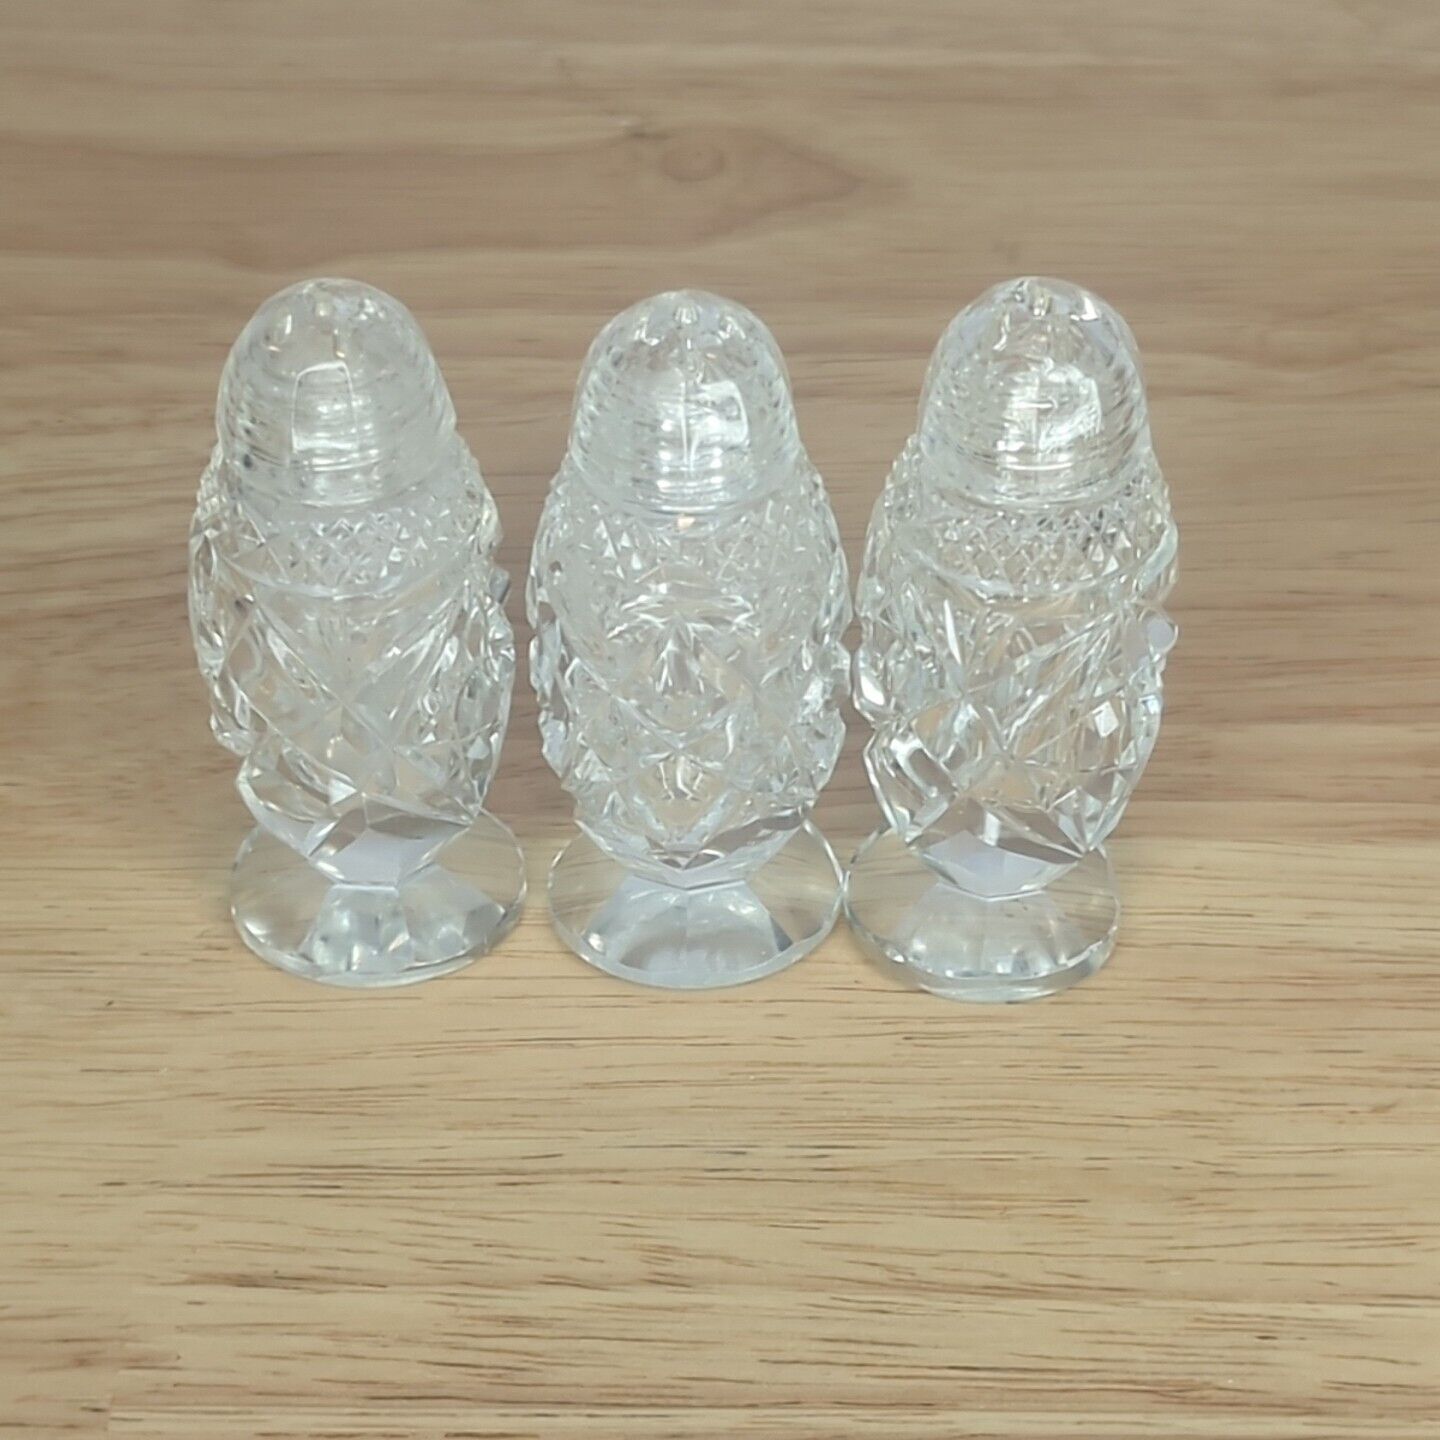 Set of 3 Matching Cut Glass Crystal Salt & Pepper Shakers with Glass Tops VTG